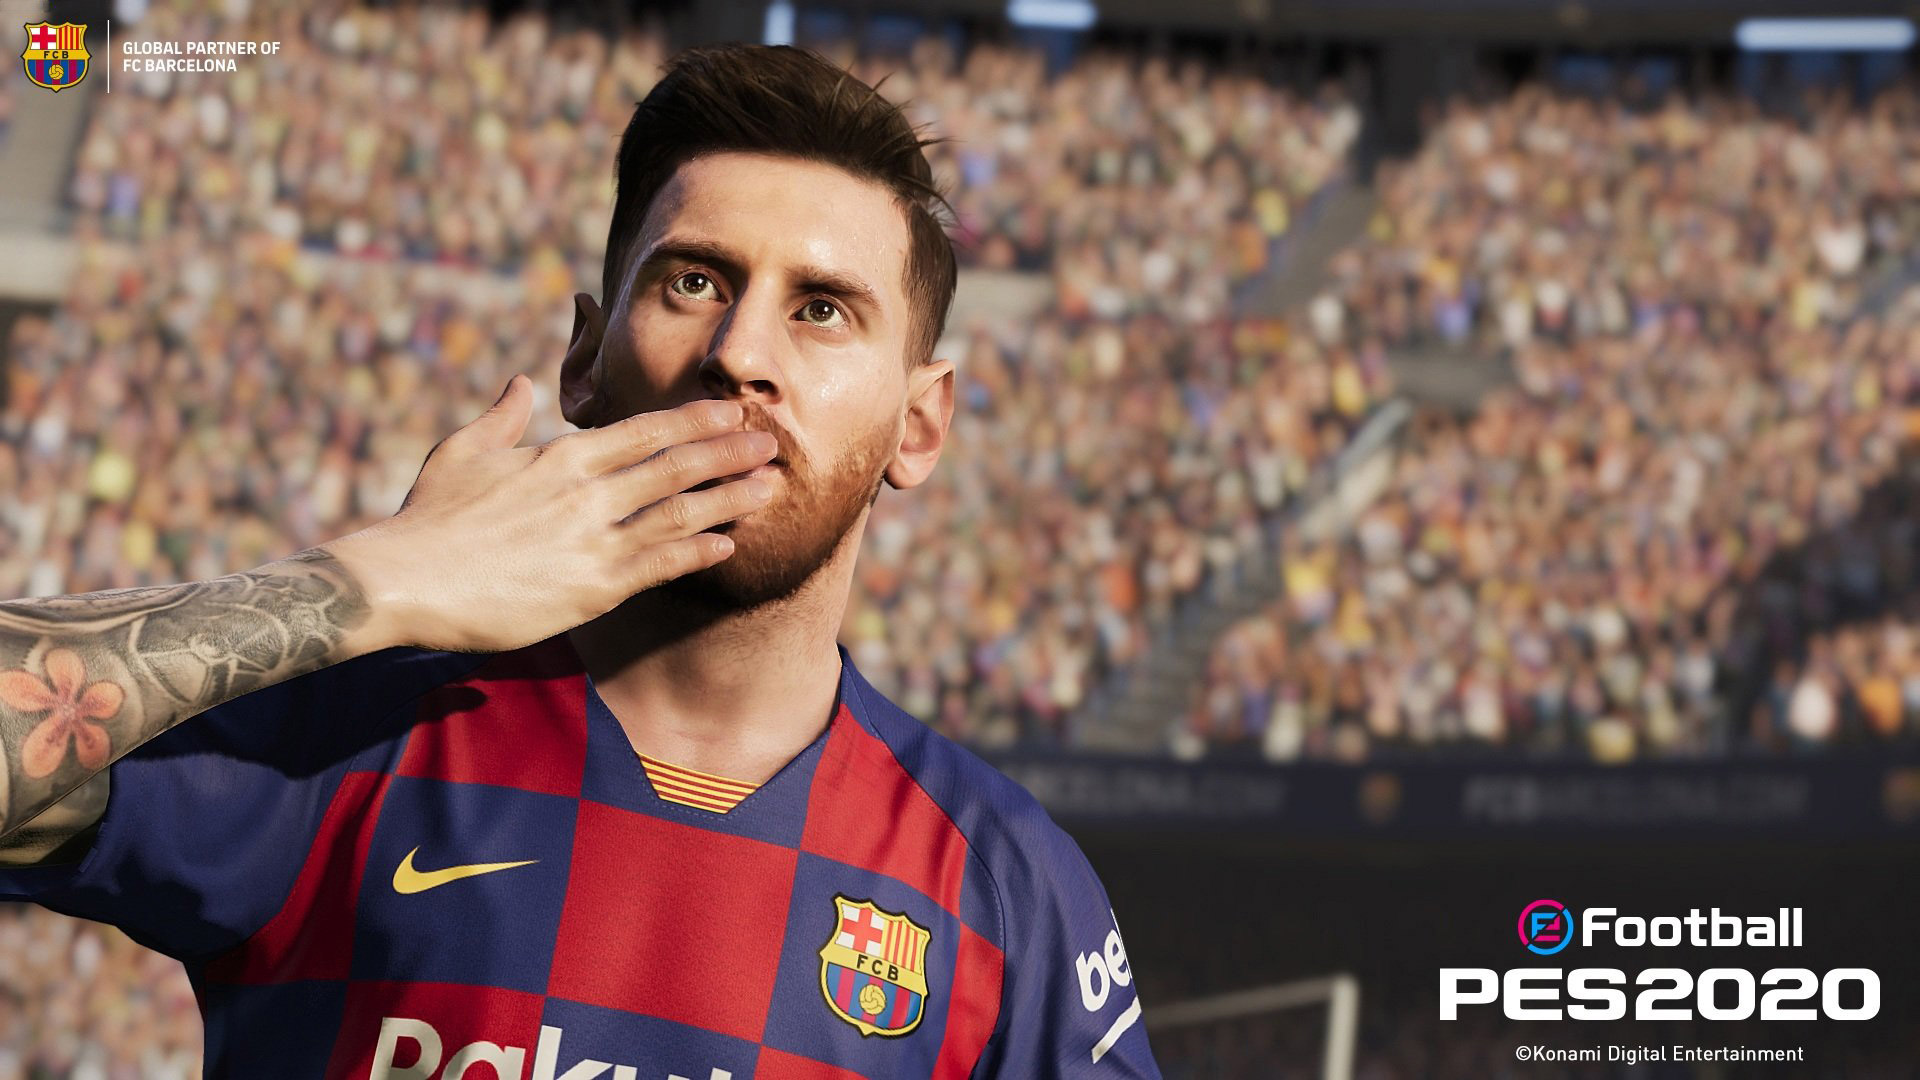 Free Efootball Pes 2020 Wallpaper In - Messi In Pes 2020 - HD Wallpaper 